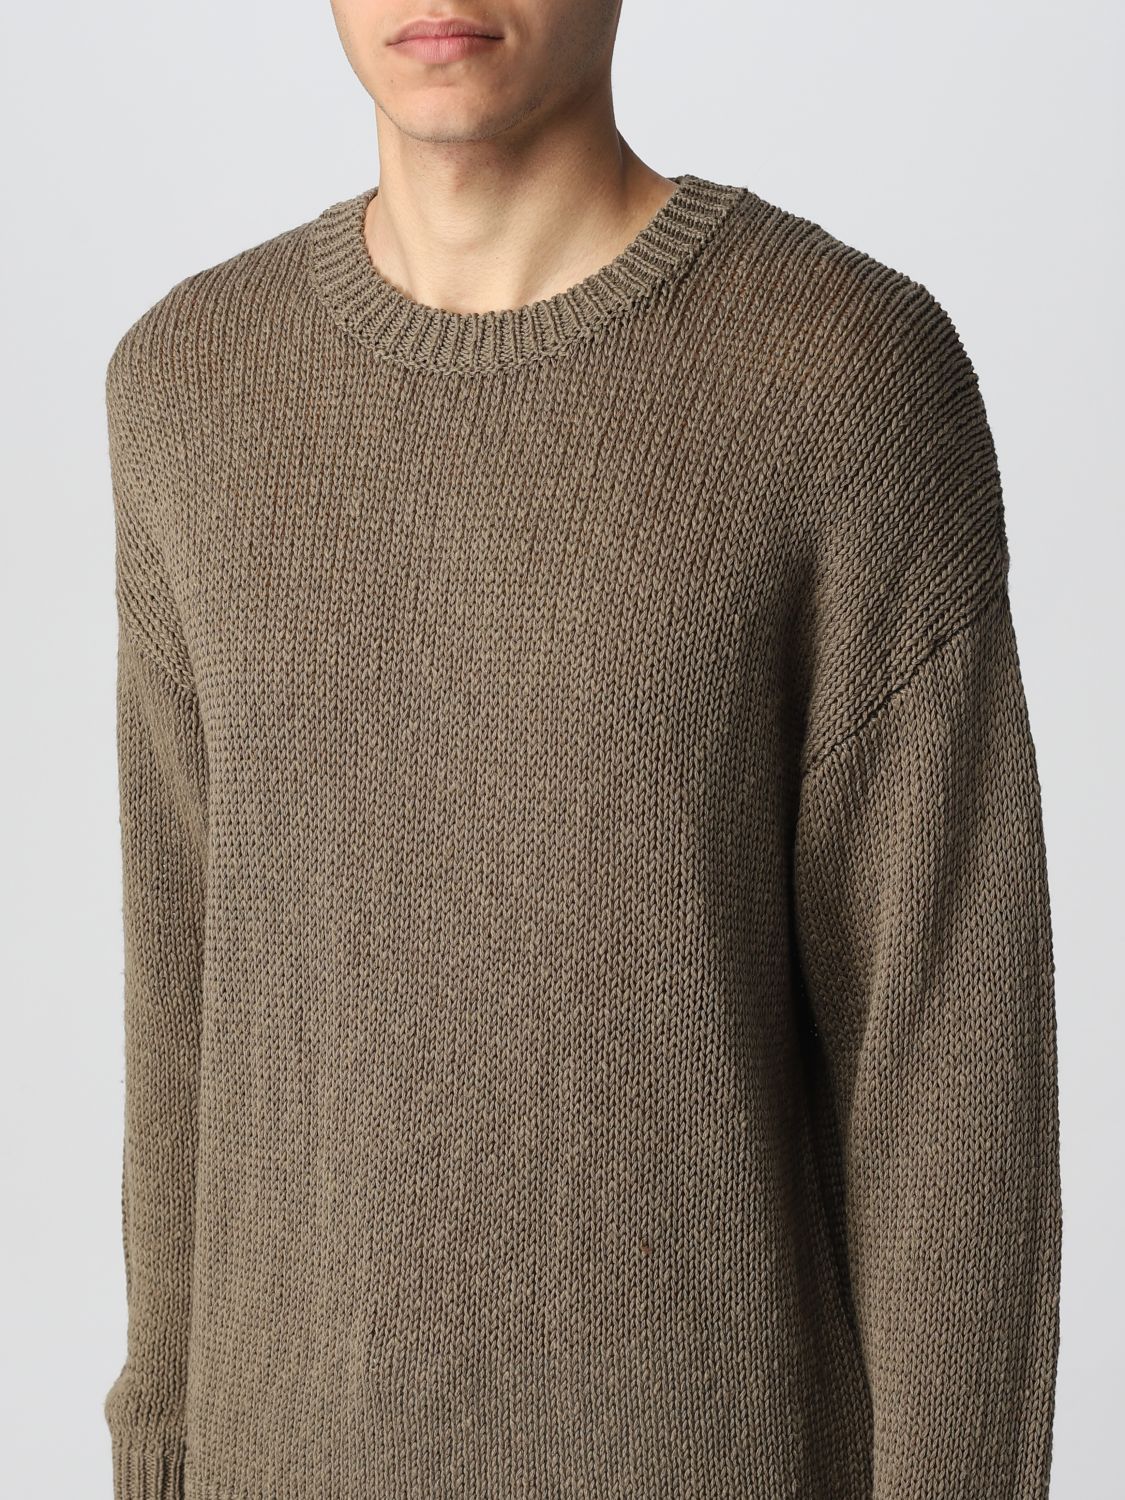 Sweater Roberto Collina: Roberto Collina sweater for man green 3